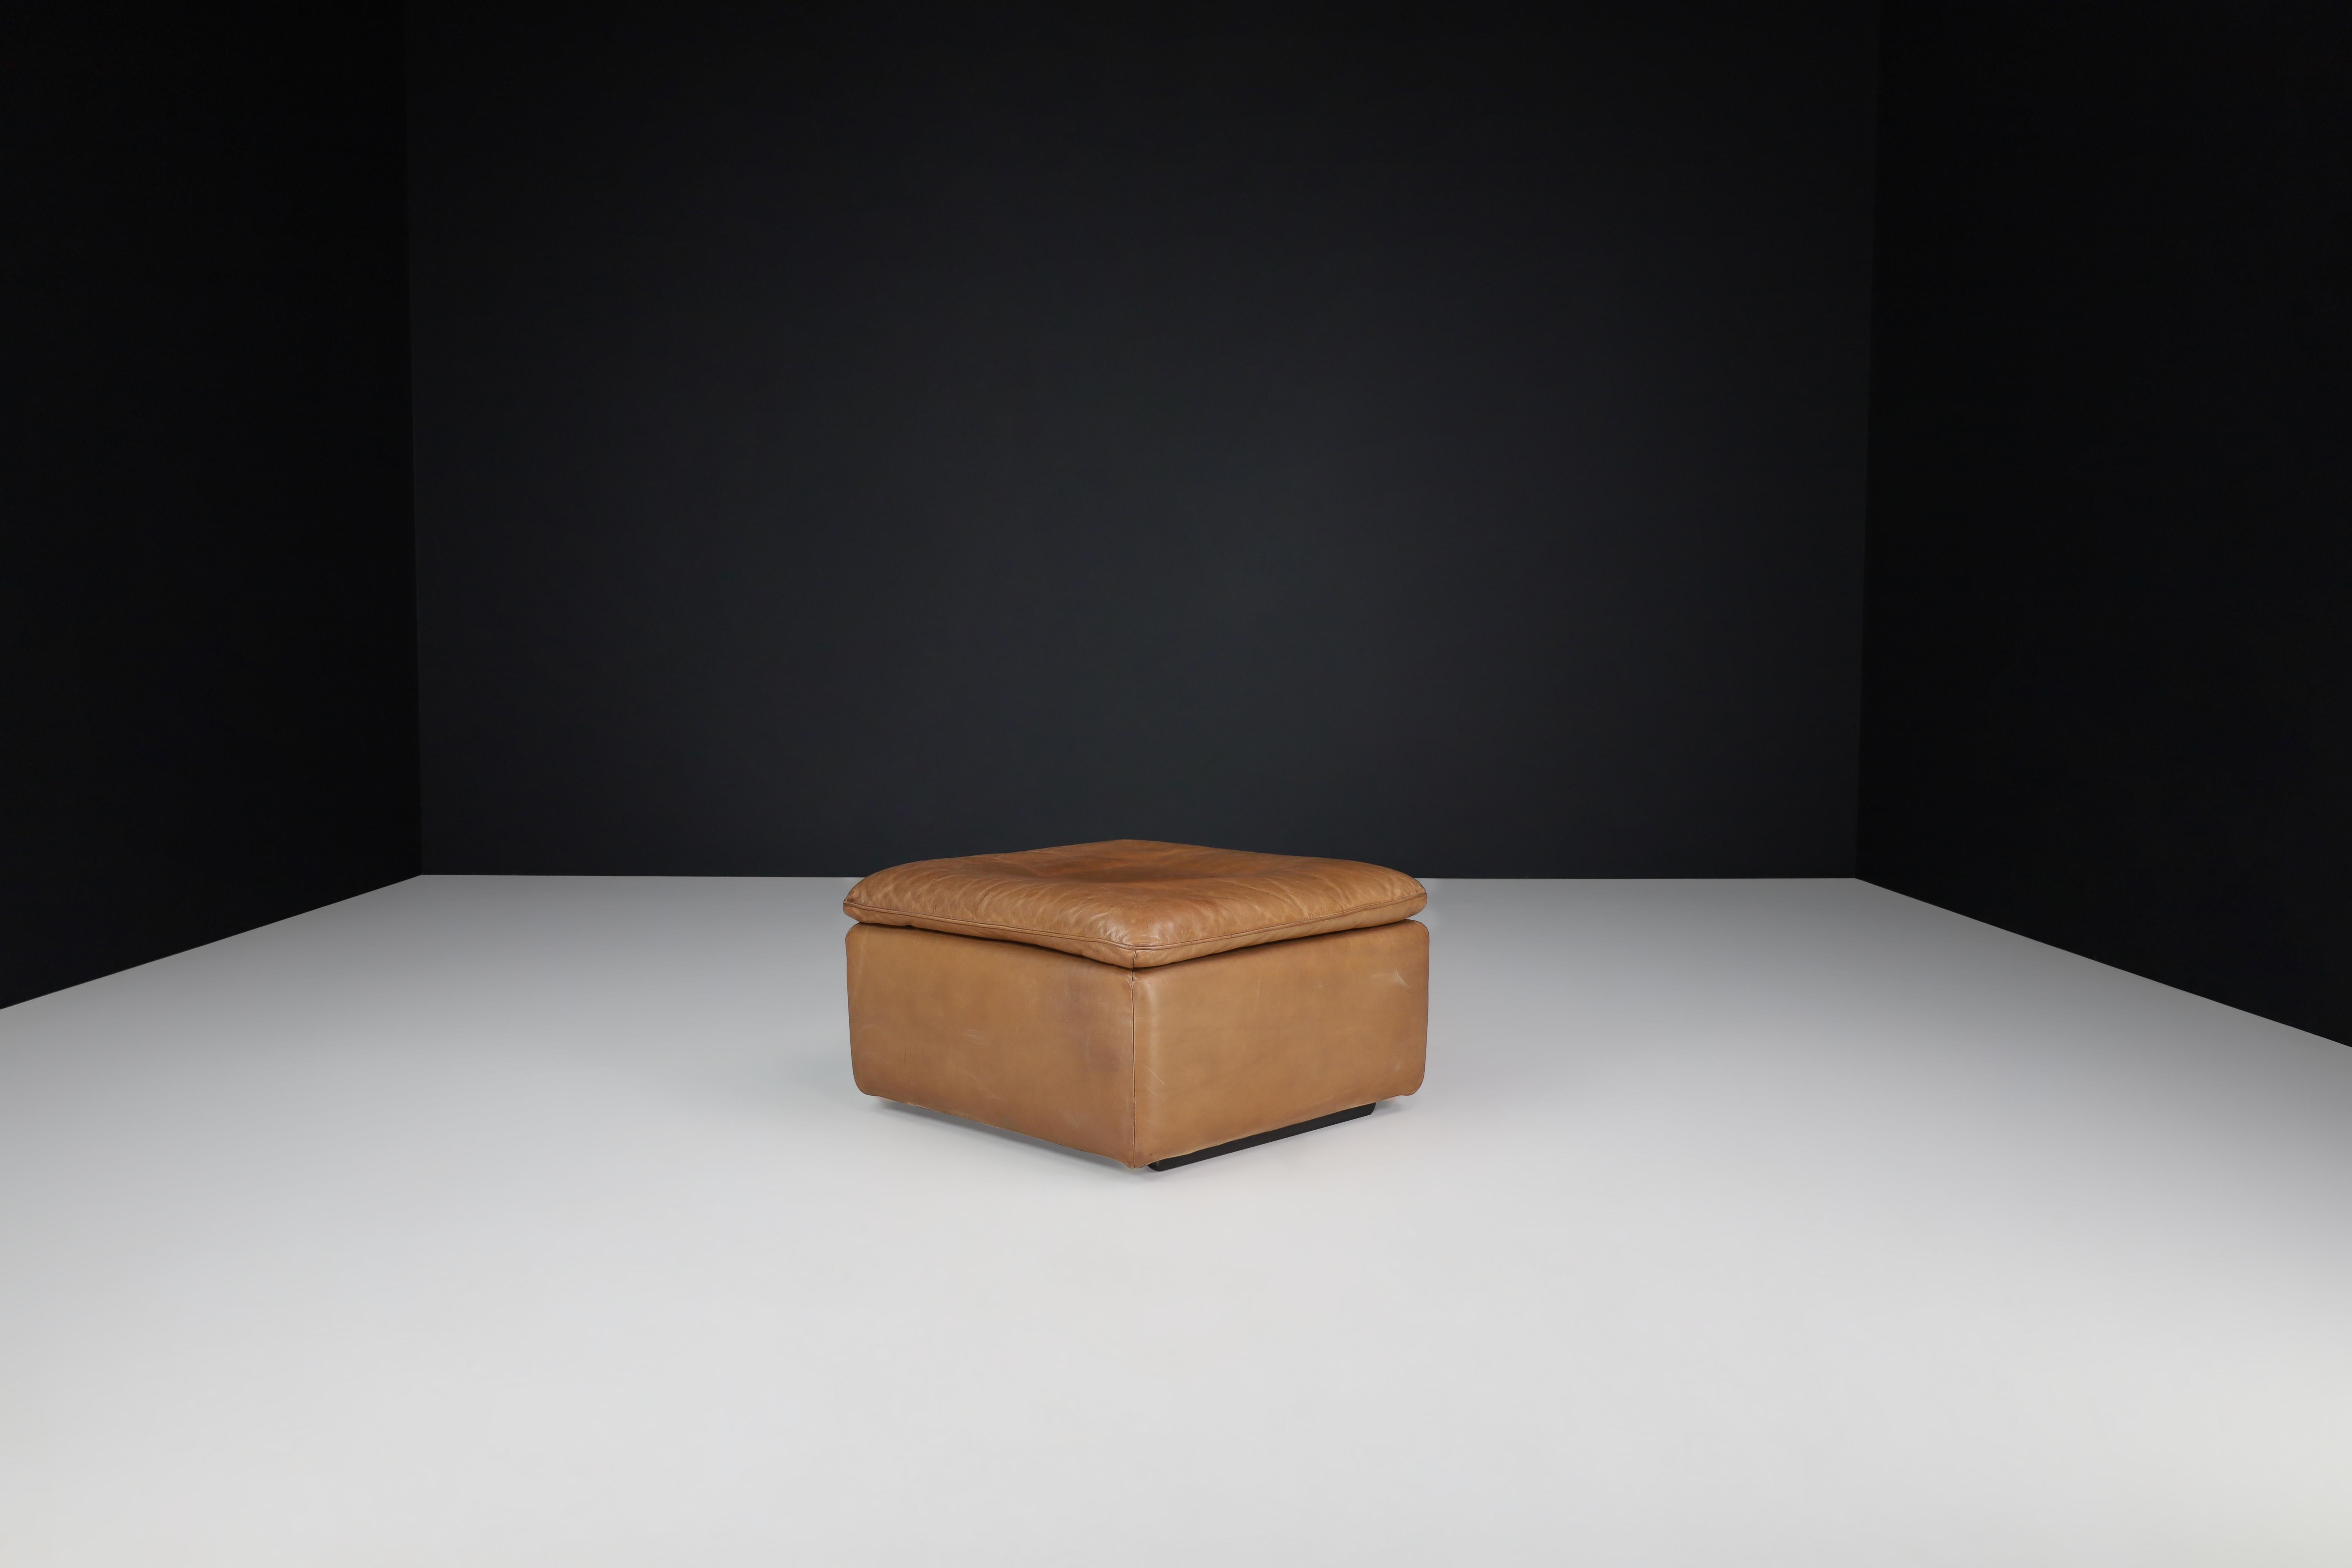 De Sede Grande Pouf in patinated cognac leather, Switzerland, 1970s 

This robust patinated De Sede grande pouf ensures ultimate comfort and building quality with its solid wooden frame and thick handstitched leather upholstery. Nice original